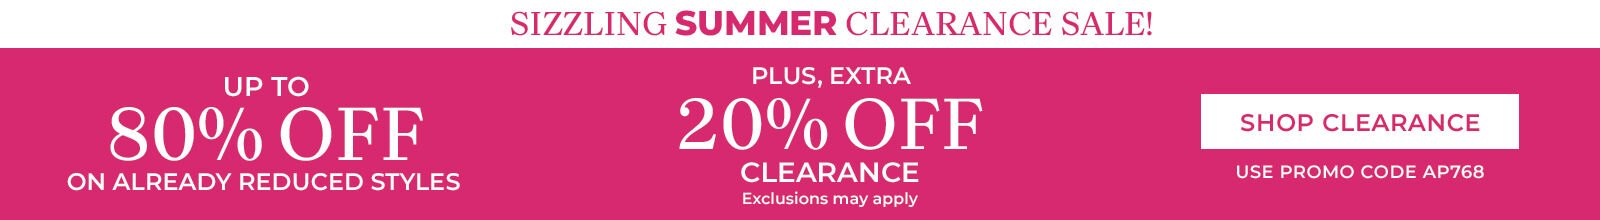 sizzling summer clearance sale! up yo 80% off on already reduced stylesplus extra 20% off clearance exclusions may apply shop clearance use promo code: AP768